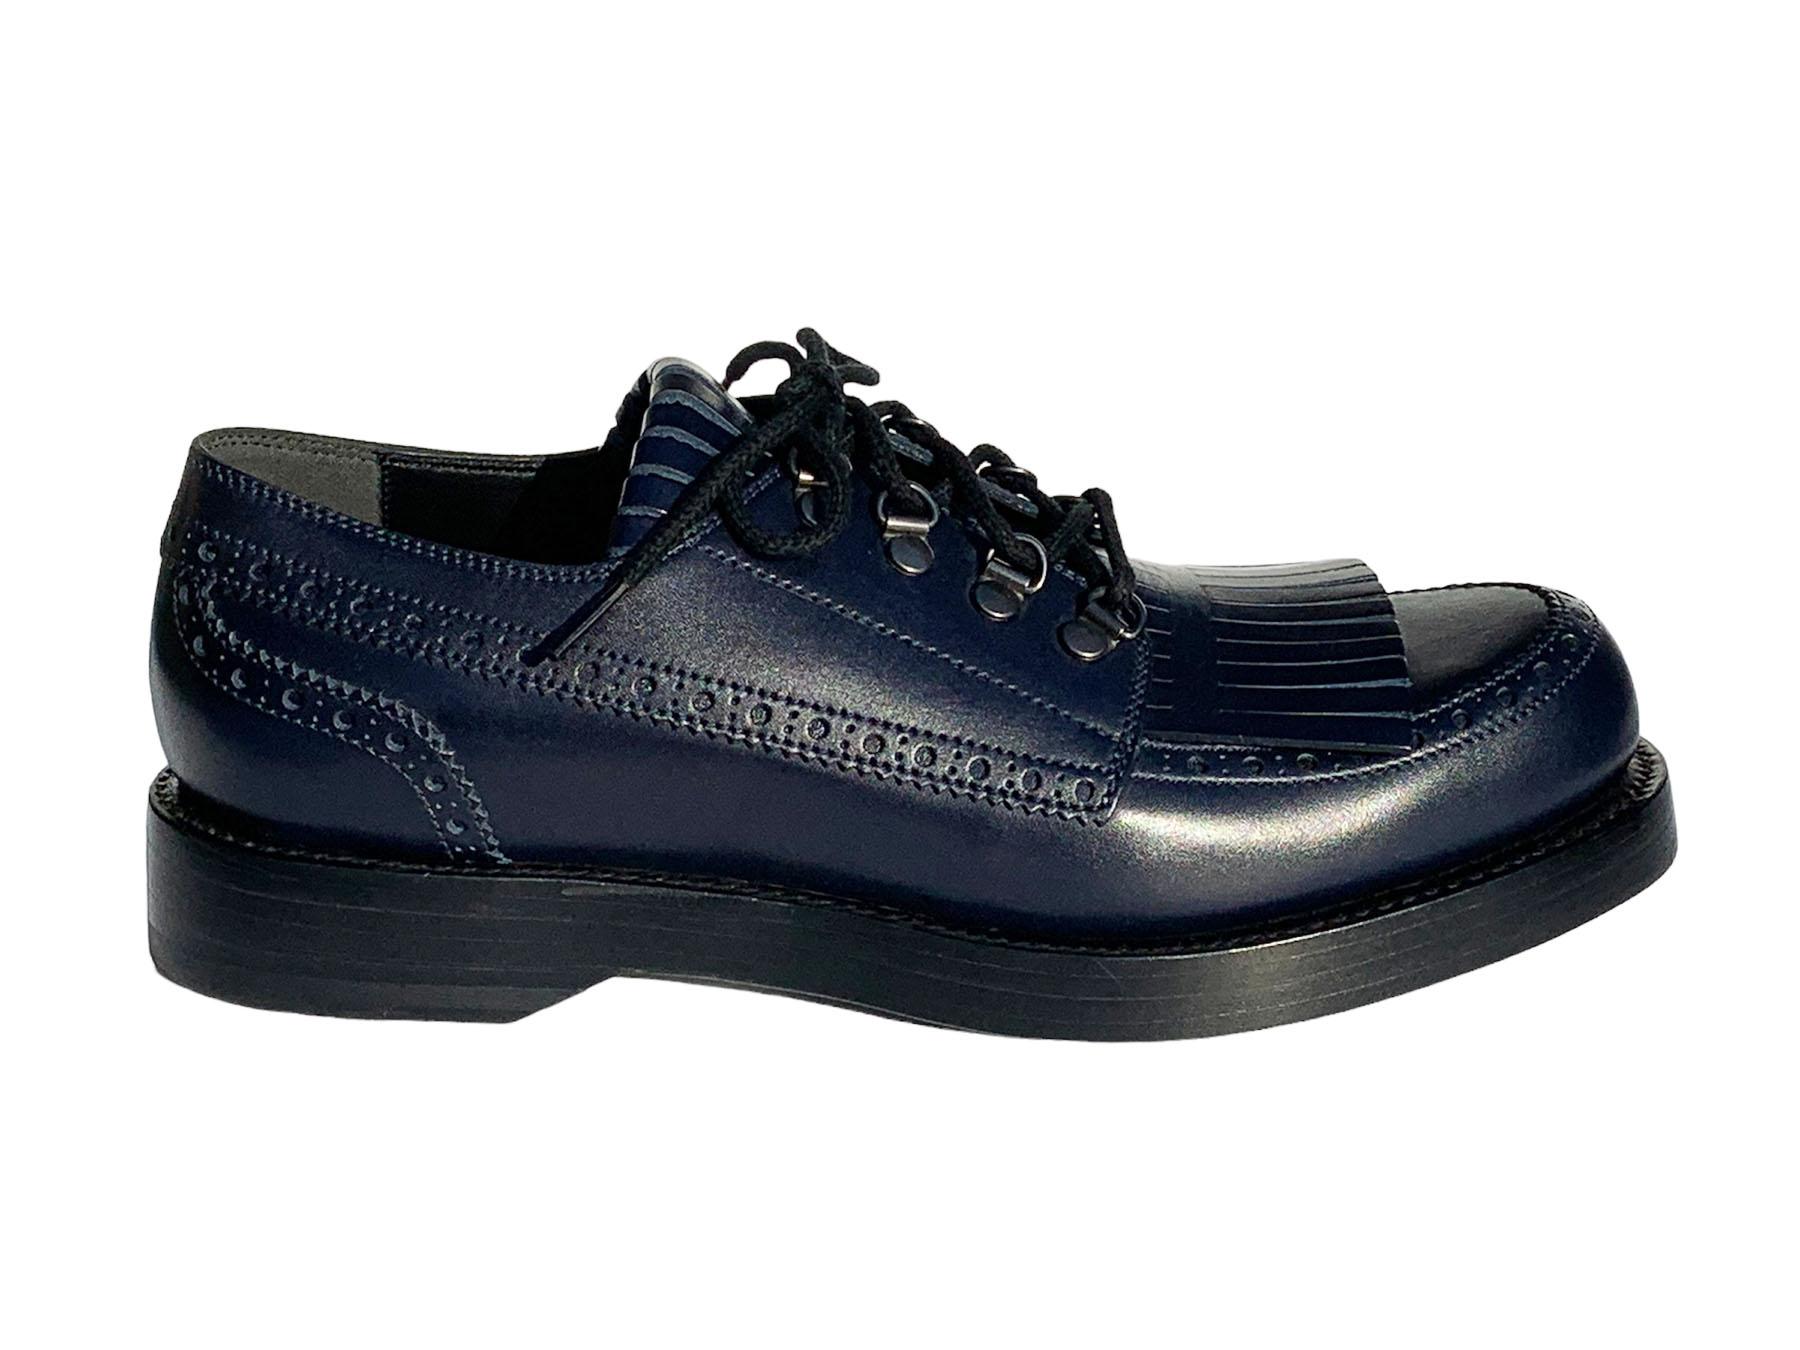 New Gucci Men's Leather Fringed Brogue Lace-Up Shoes Dark Blue US 10 In New Condition For Sale In Montgomery, TX